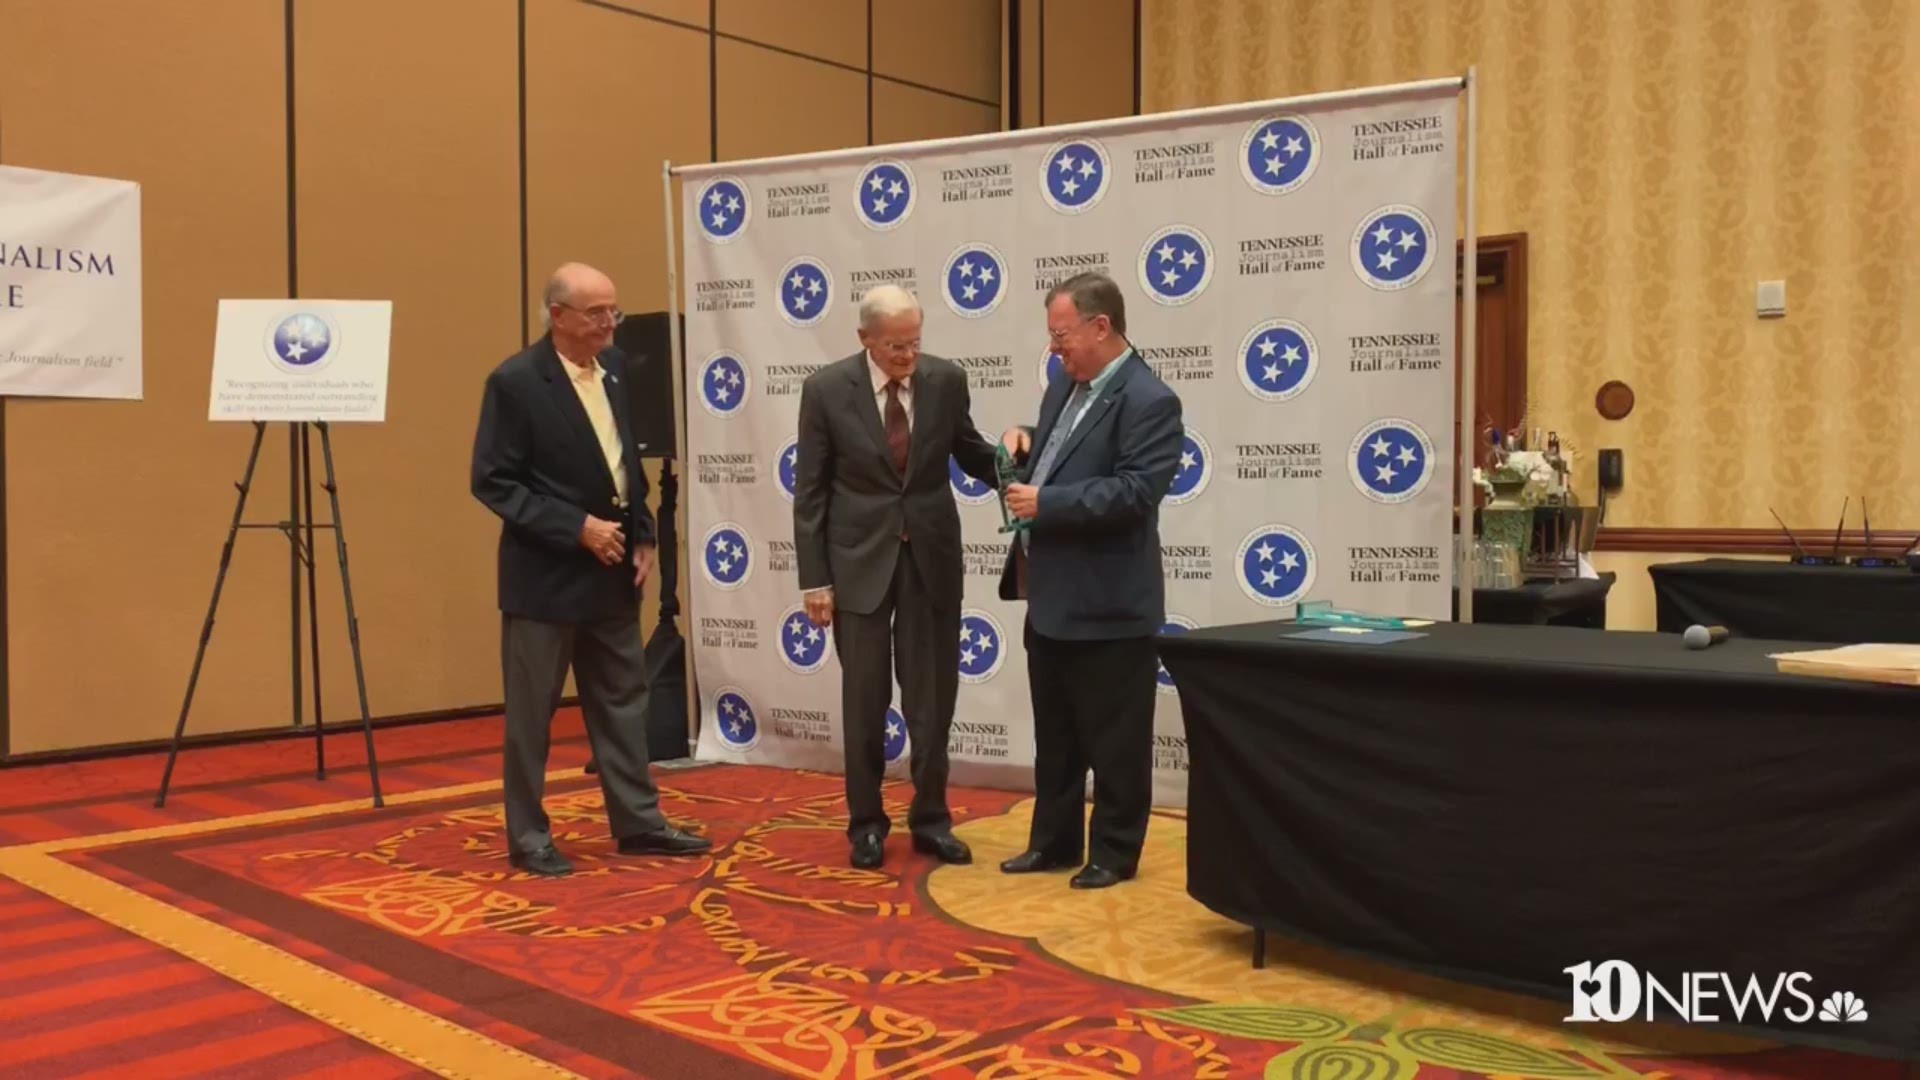 The Tennessee Journalism Hall of Fame inducted WBIR Anchor Emeritus Bill Williams into the 2019 class. The ceremony was in Murfreesboro Tuesday evening at the Tennessee Association of Broadcasters conference.